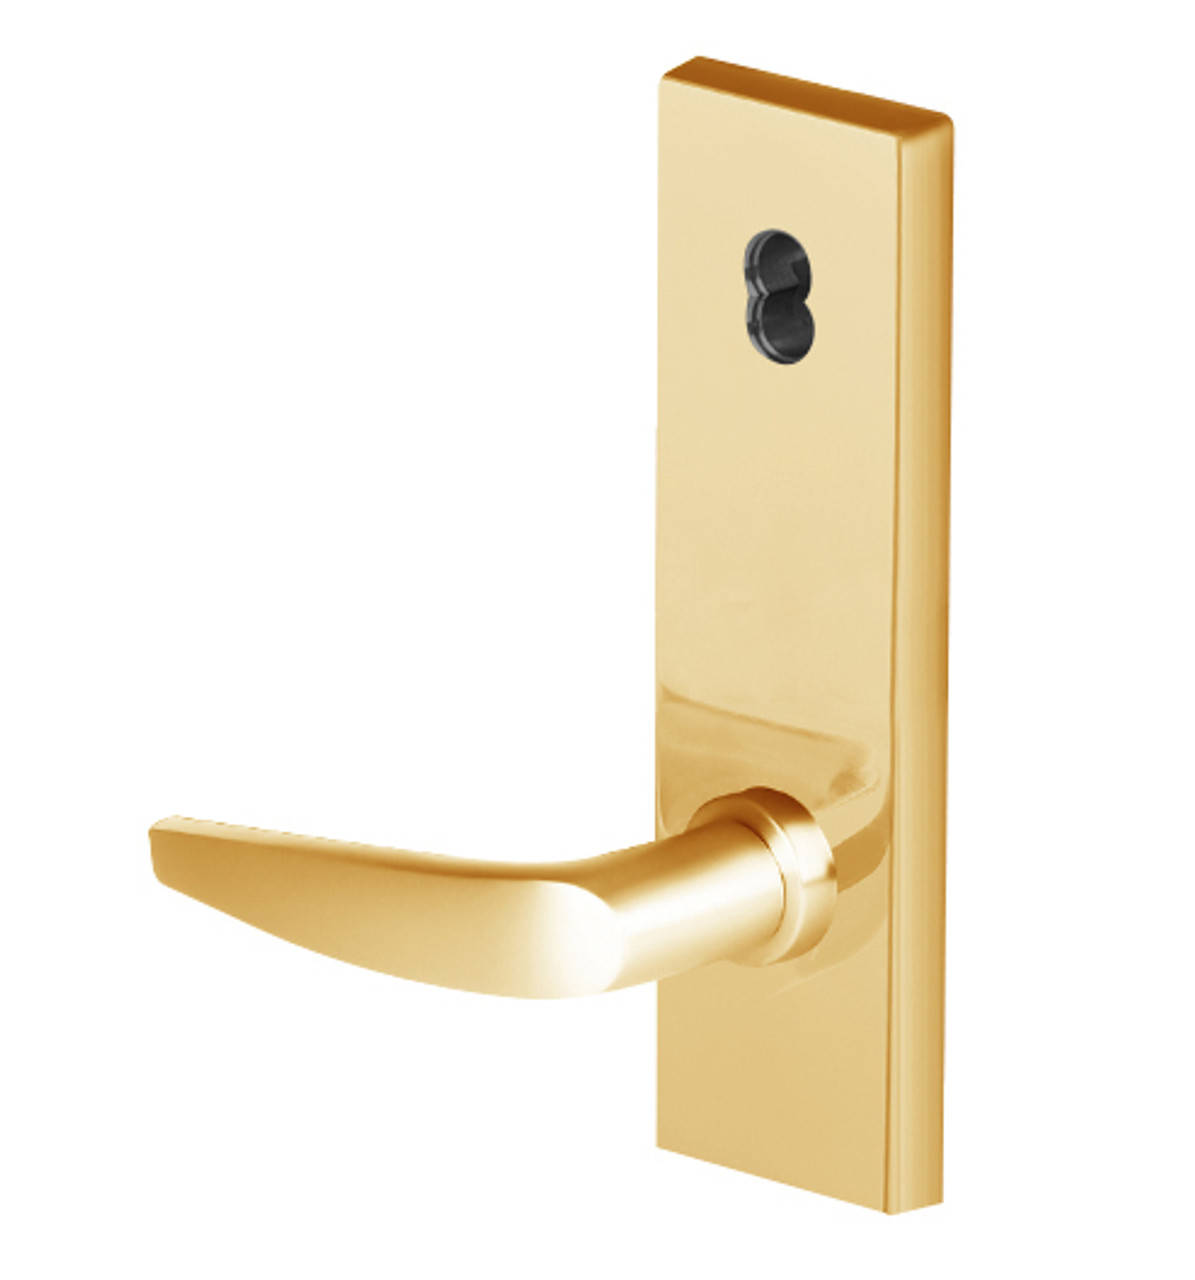 45H7R16N605 Best 40H Series Classroom Heavy Duty Mortise Lever Lock with Curved with No Return in Bright Brass